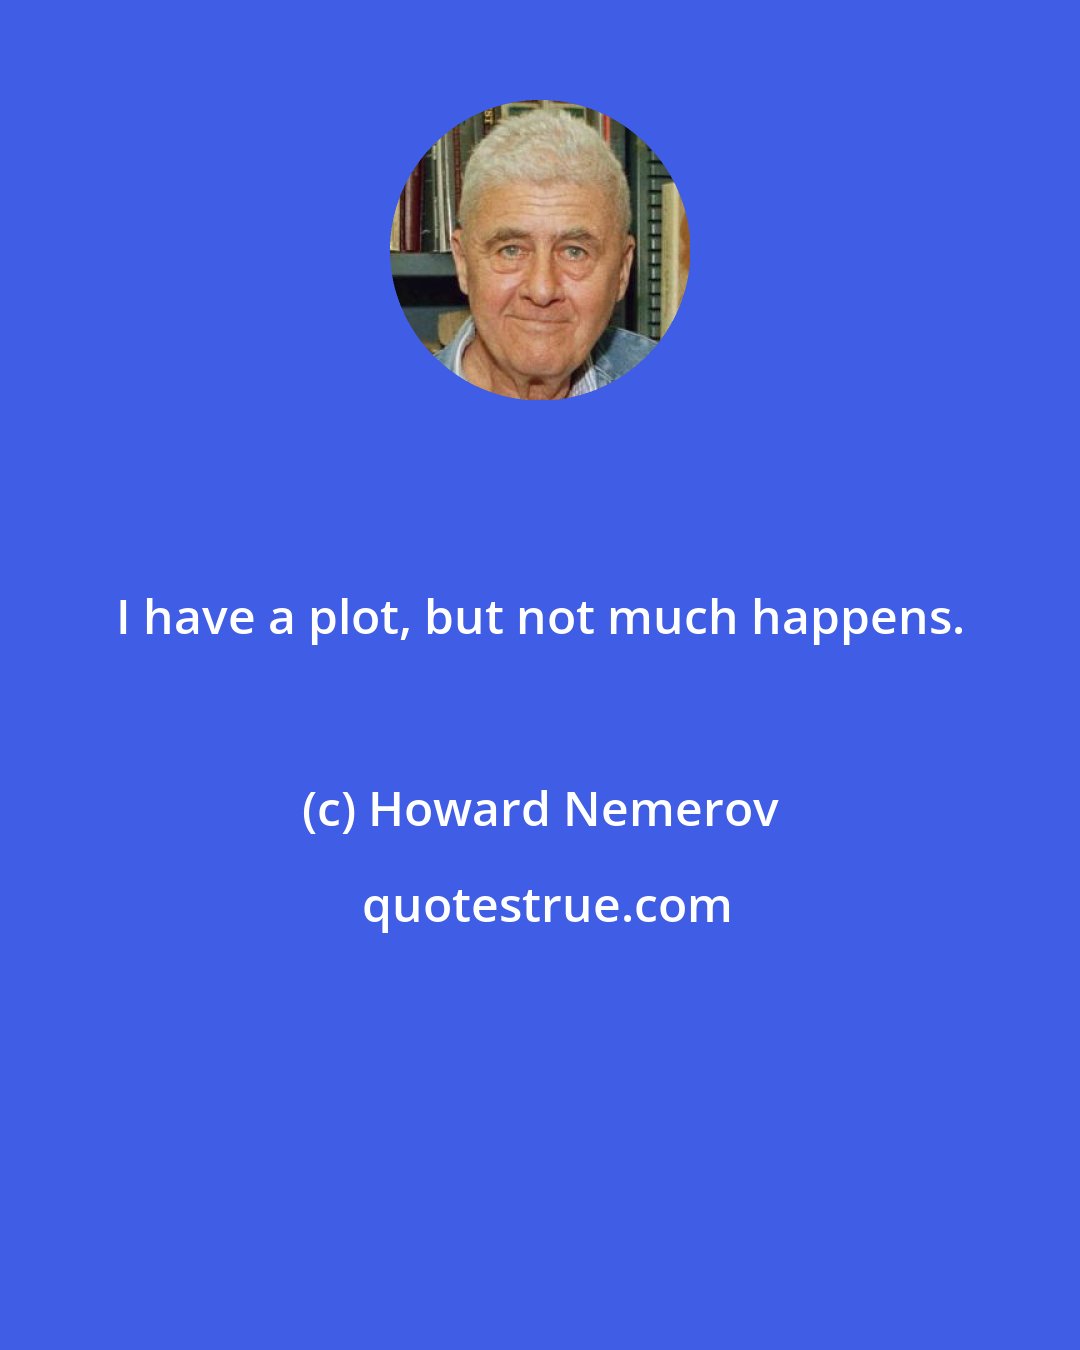 Howard Nemerov: I have a plot, but not much happens.